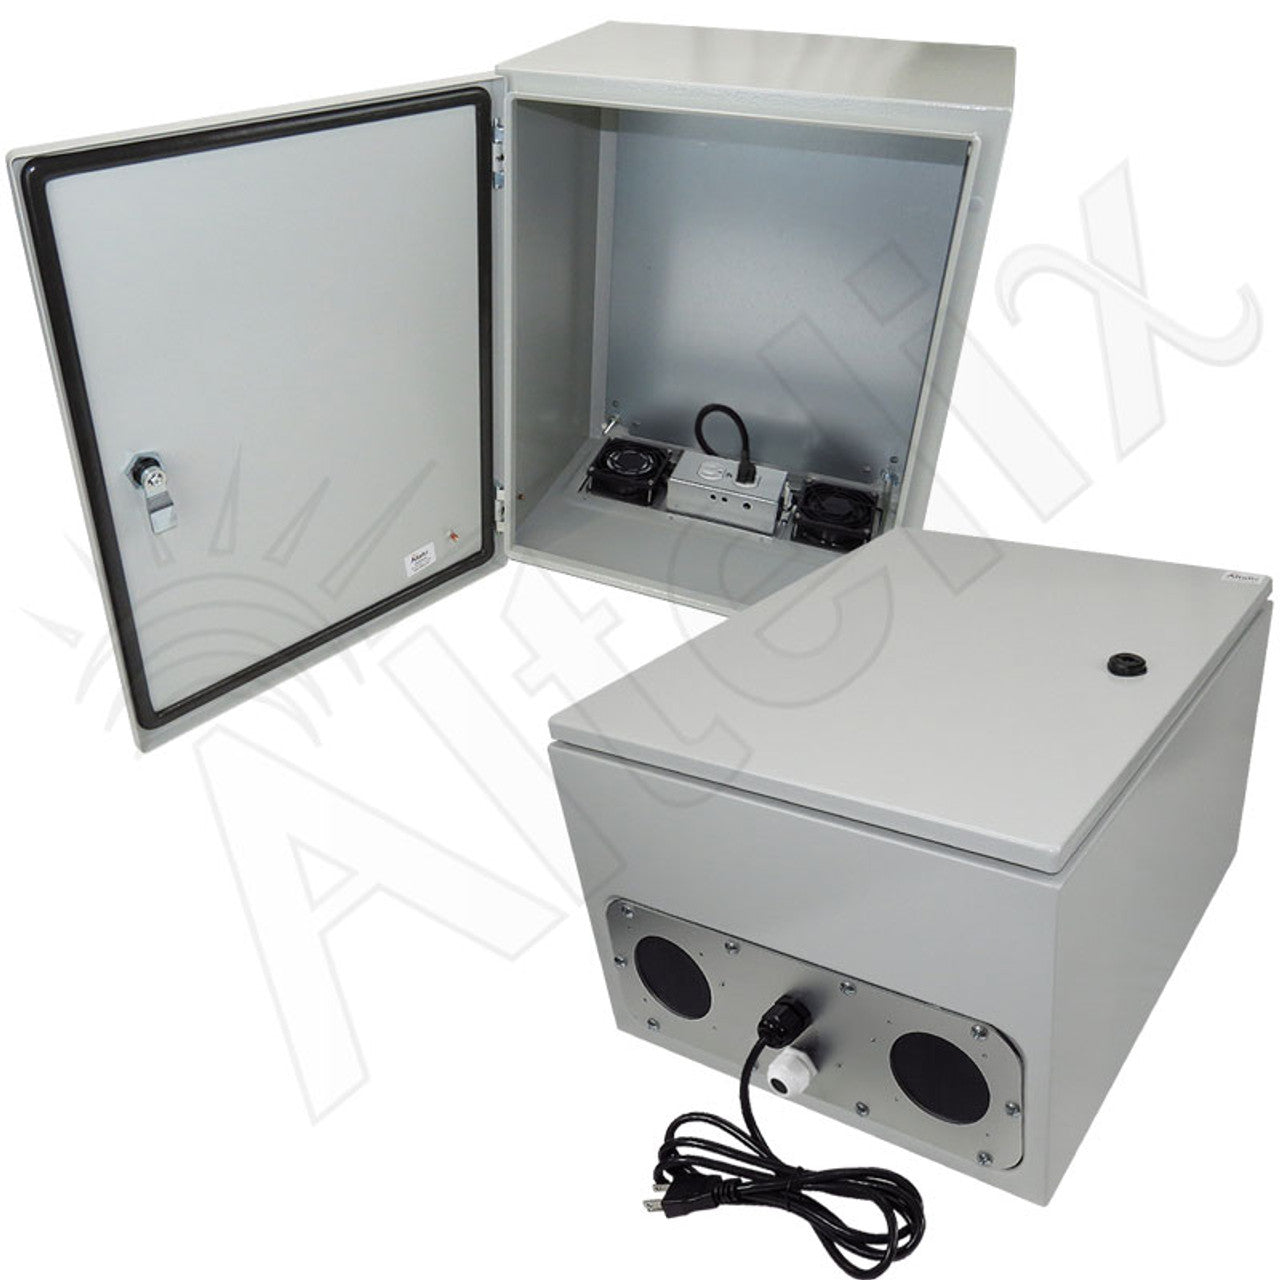 Altelix Steel Heated Weatherproof NEMA Enclosure with Dual Cooling Fans, 200W Heater, 120 VAC Outlets and Power Cord-3